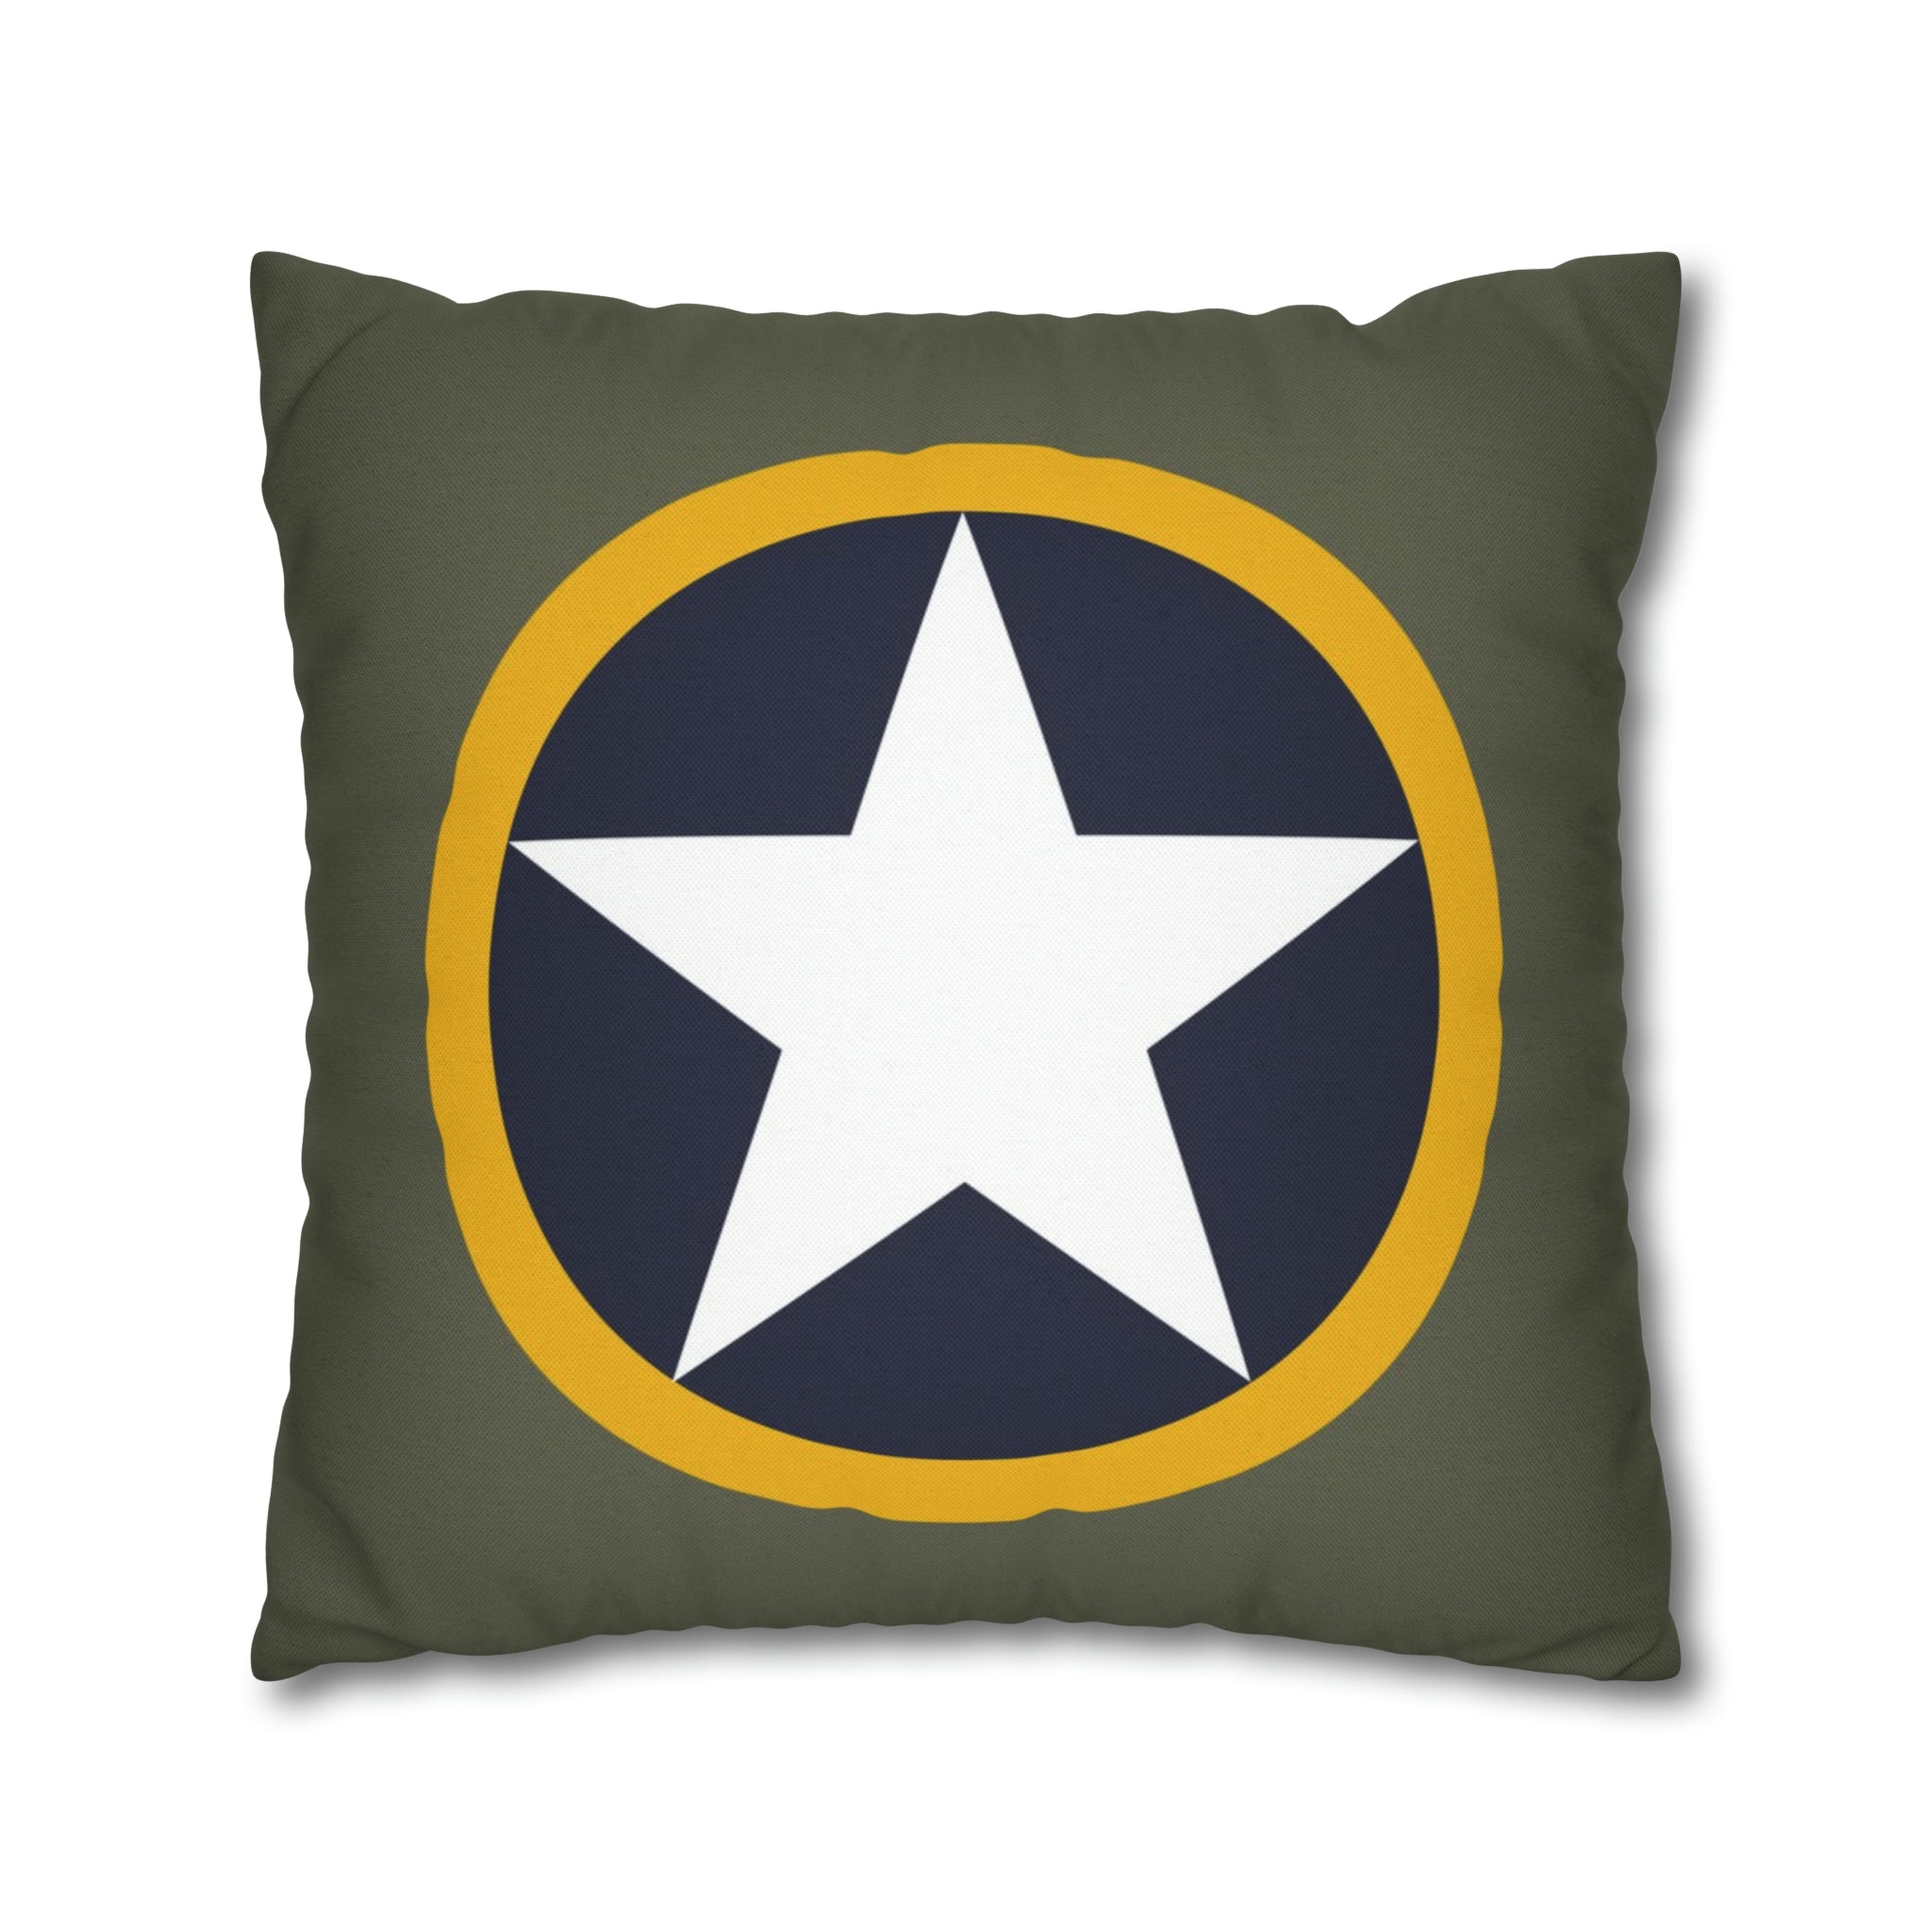 WWII USAAF "Operation Torch" Roundel Square Pillowcase - I Love a Hangar